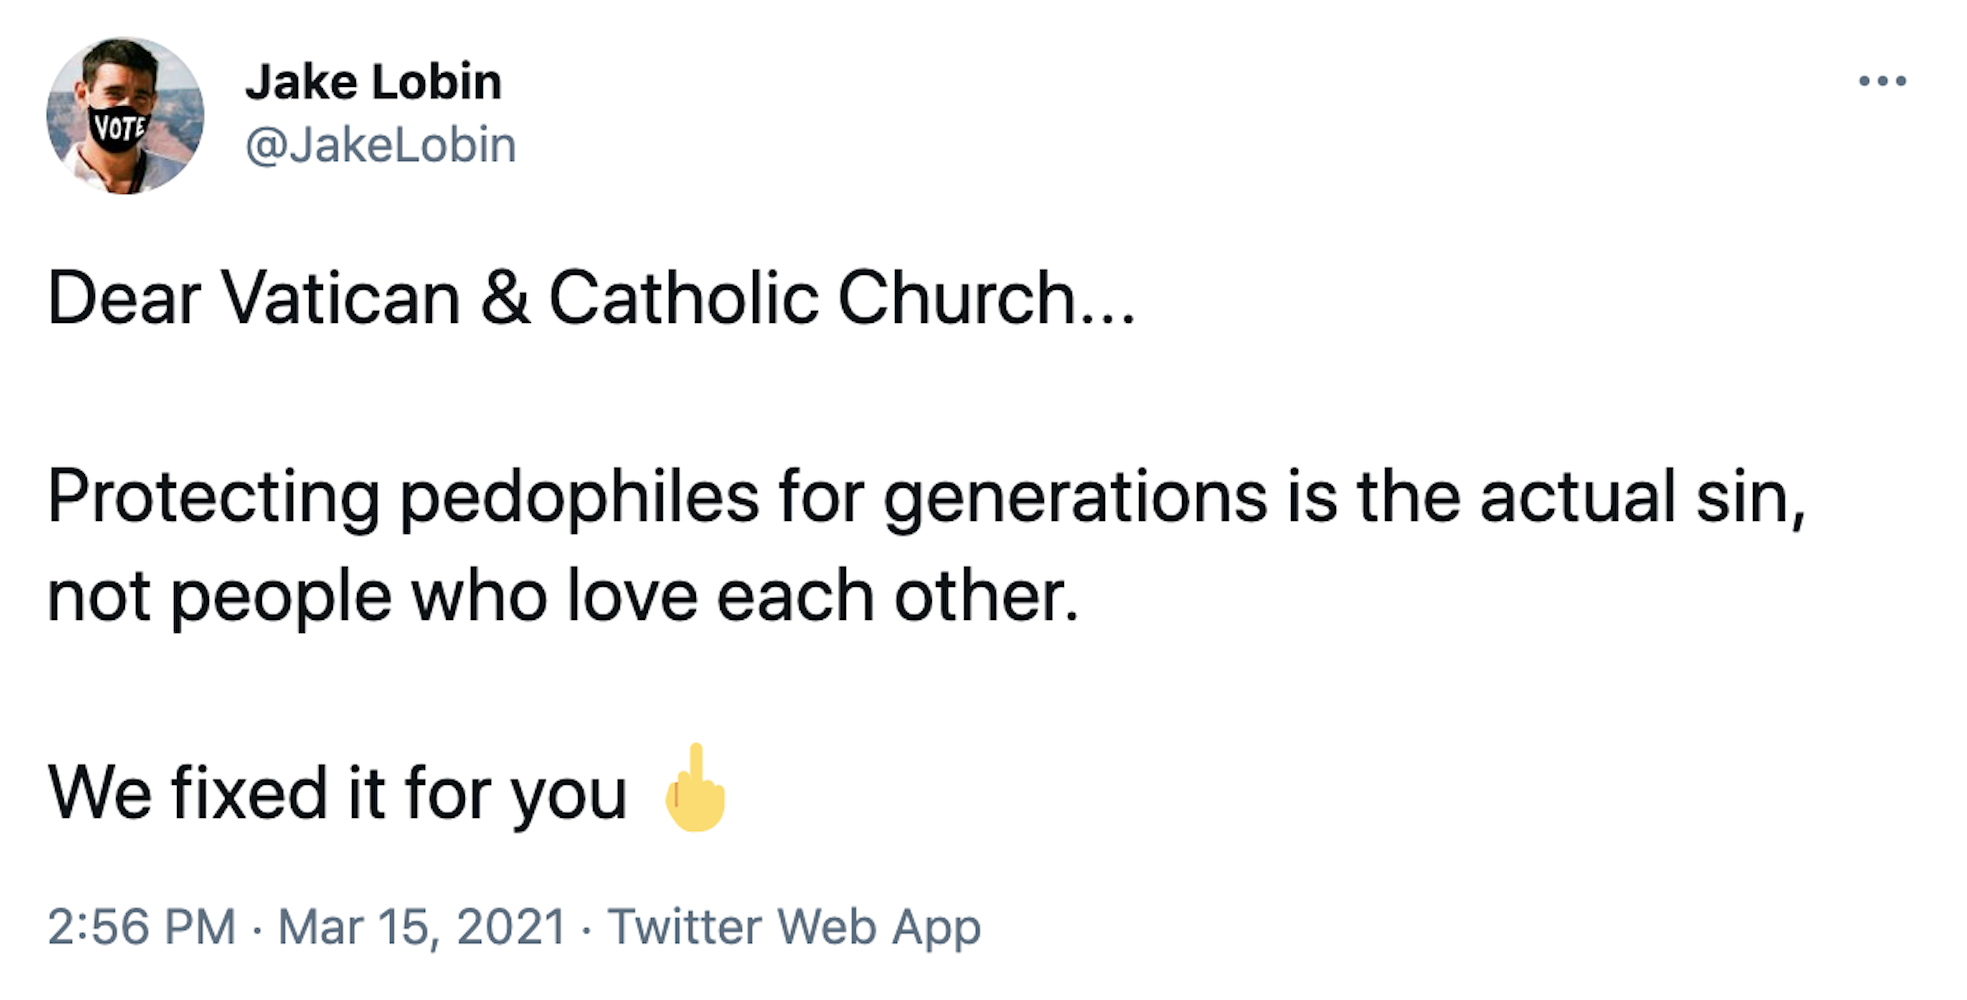 Dear Vatican & Catholic Church...  Protecting pedophiles for generations is the actual sin, not people who love each other.  We fixed it for you 🖕Dear Vatican & Catholic Church...  Protecting pedophiles for generations is the actual sin, not people who love each other.  We fixed it for you 🖕Dear Vatican & Catholic Church...  Protecting pedophiles for generations is the actual sin, not people who love each other.  We fixed it for you 🖕